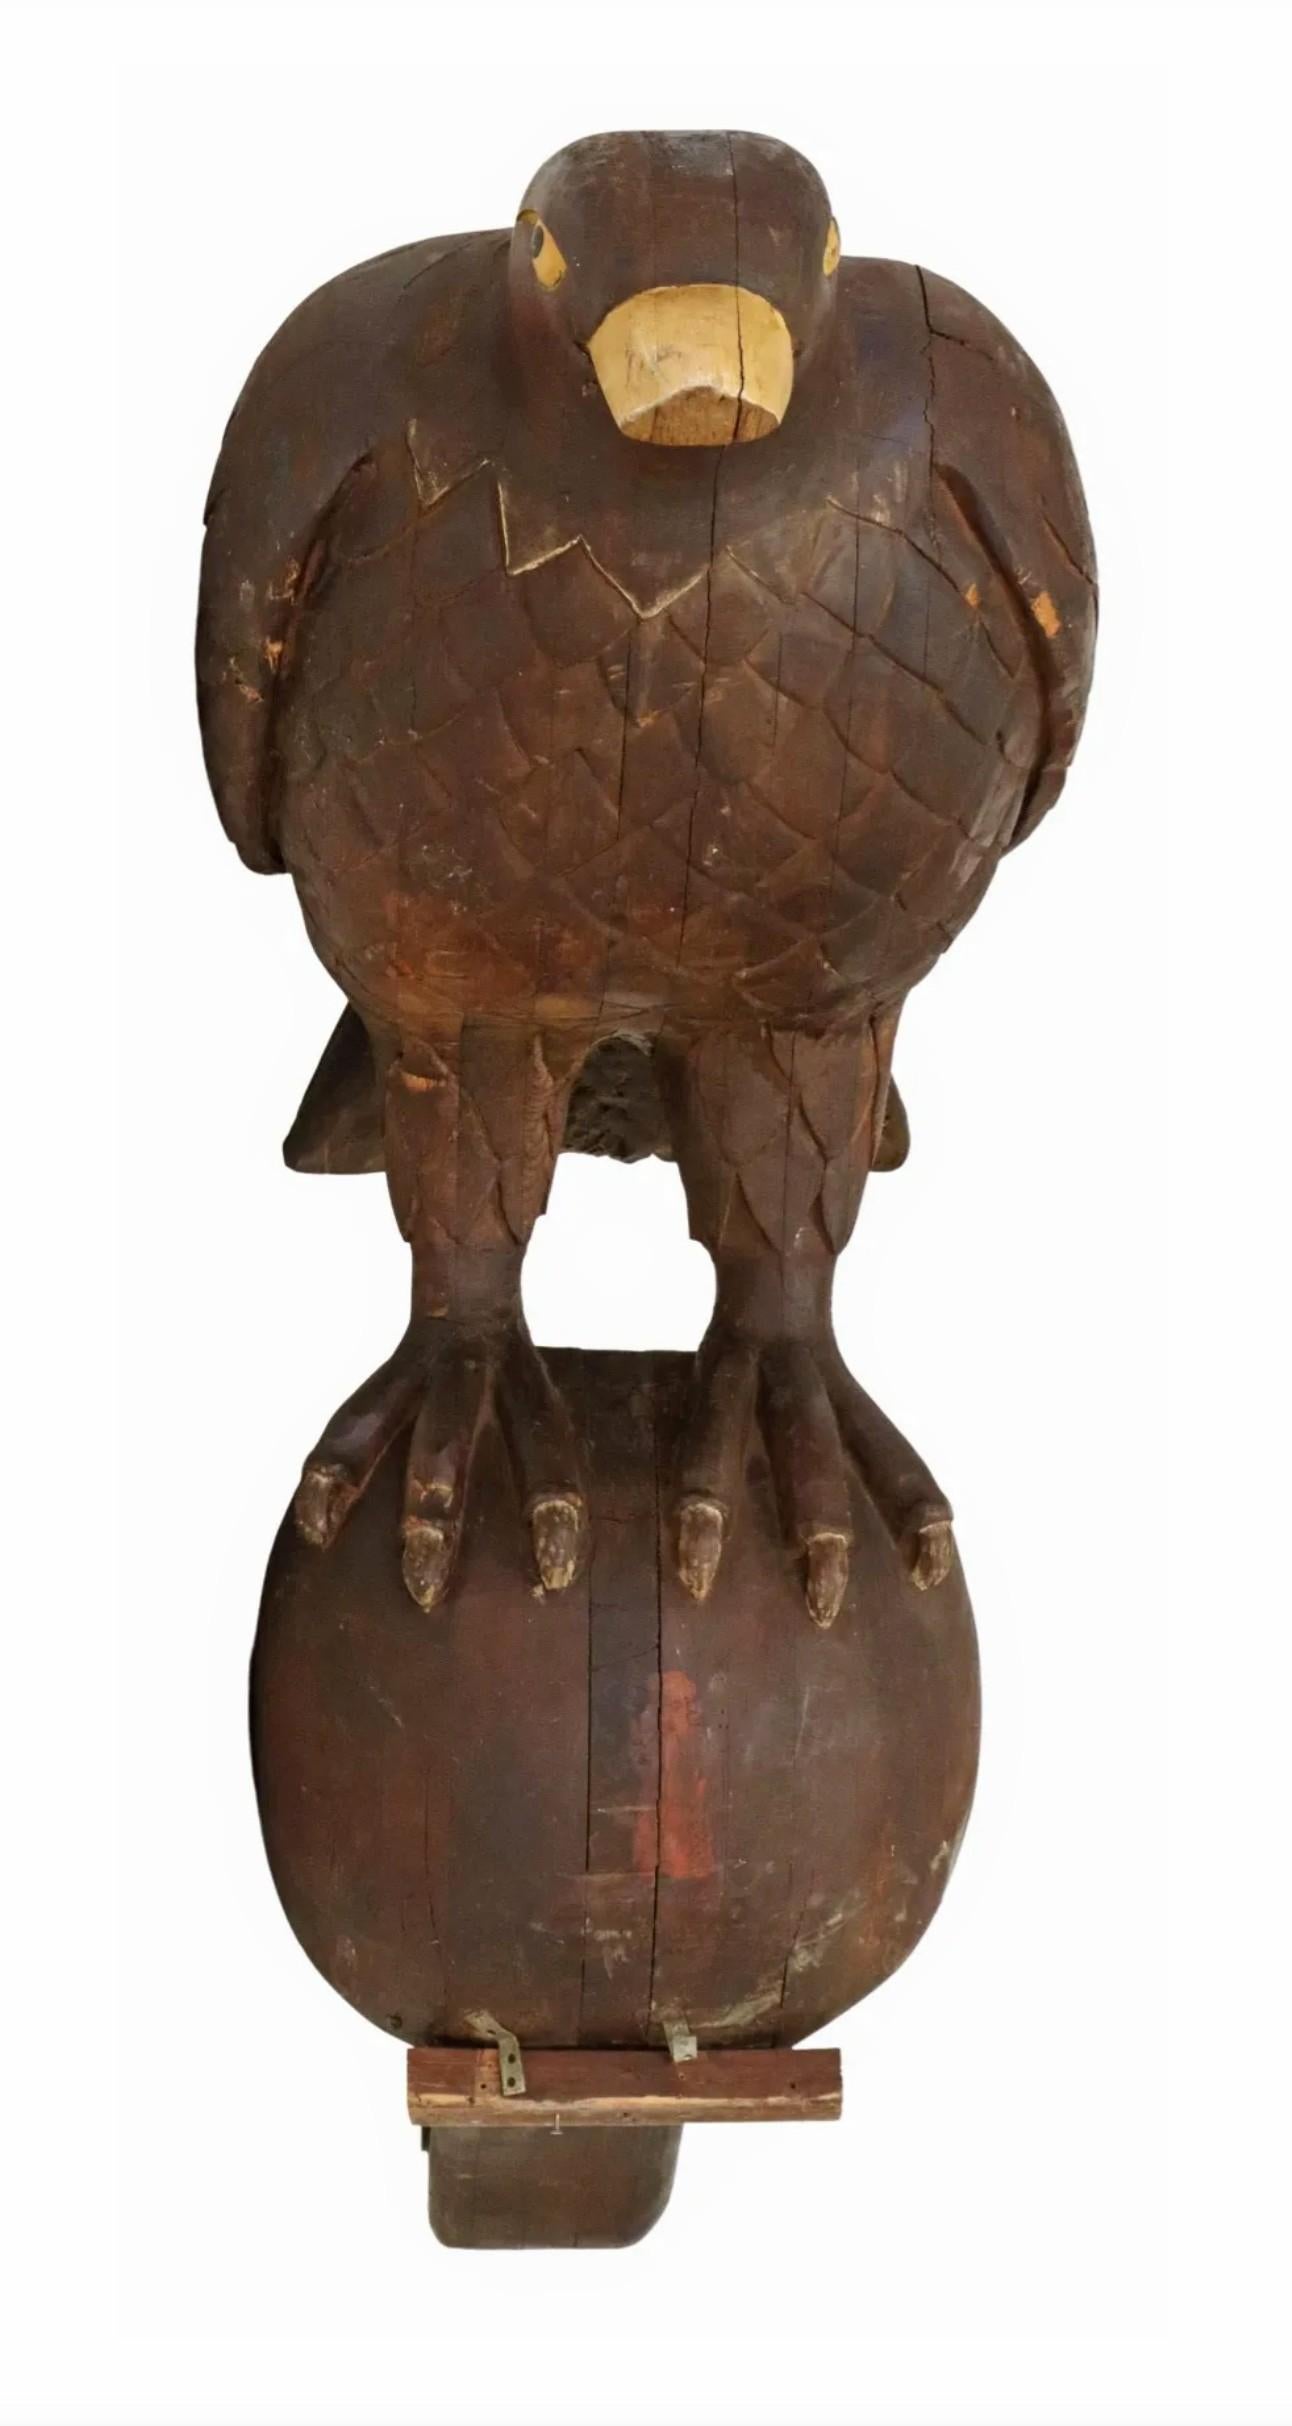 I think it's safe to say you have never seen a bird this big before!

A rare, nearly 8ft tall, one-of-a-kind antique architectural hand carved wood sculptural element, in the form of an eagle, with yellow painted beak and eyes, having closed